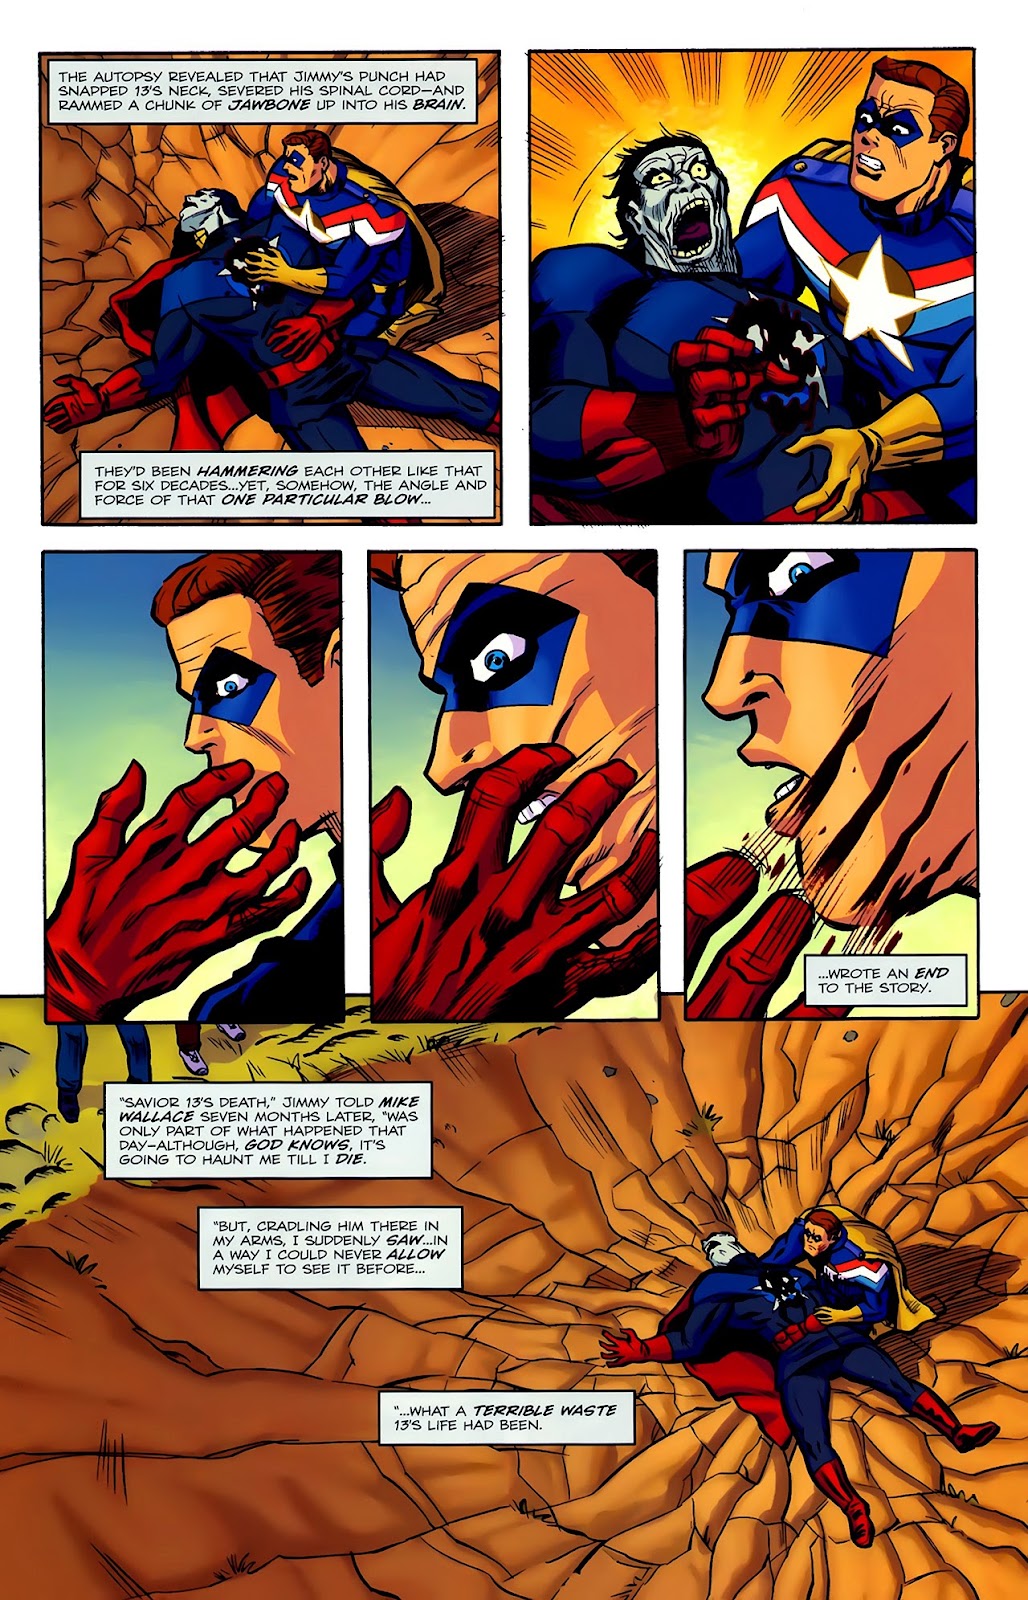 The Life and Times of Savior 28 issue 1 - Page 18